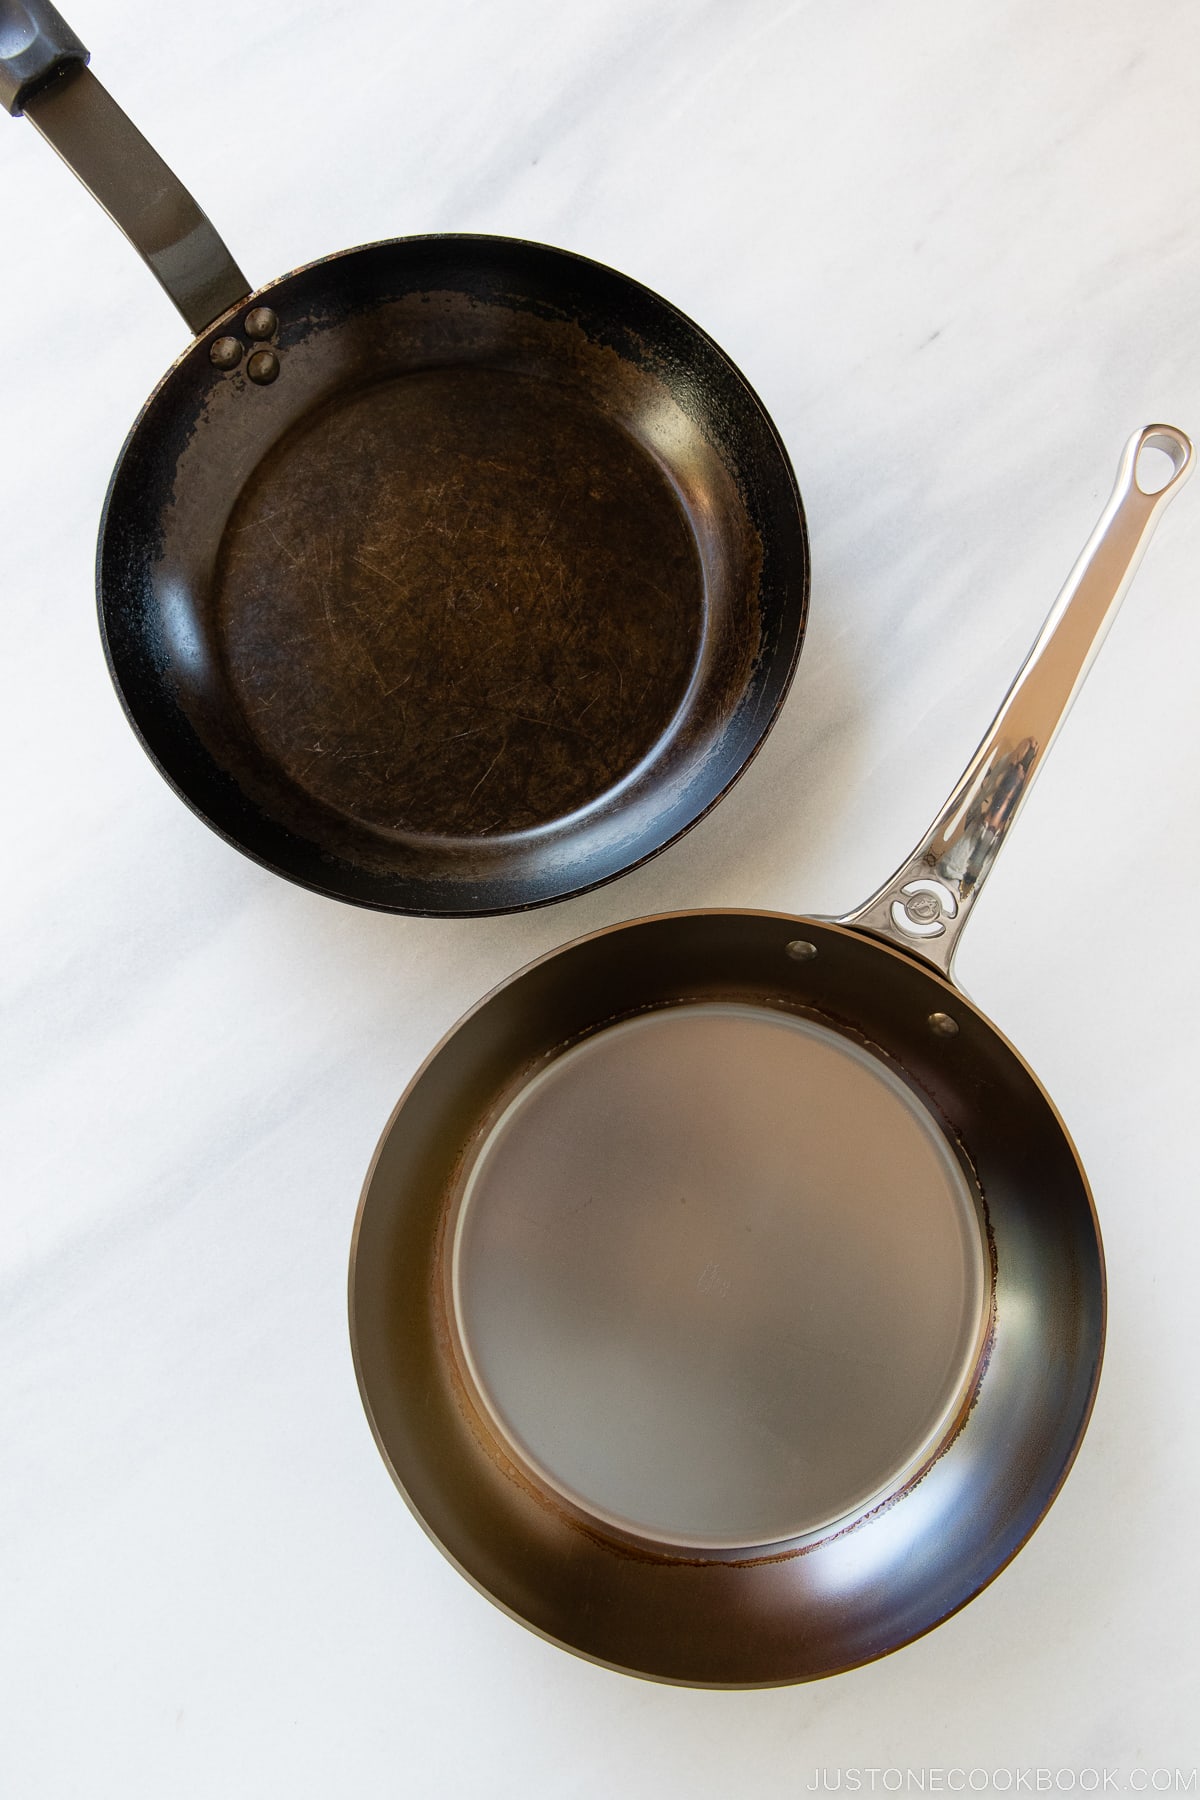 newly seasoned and well used carbon steel fry pan